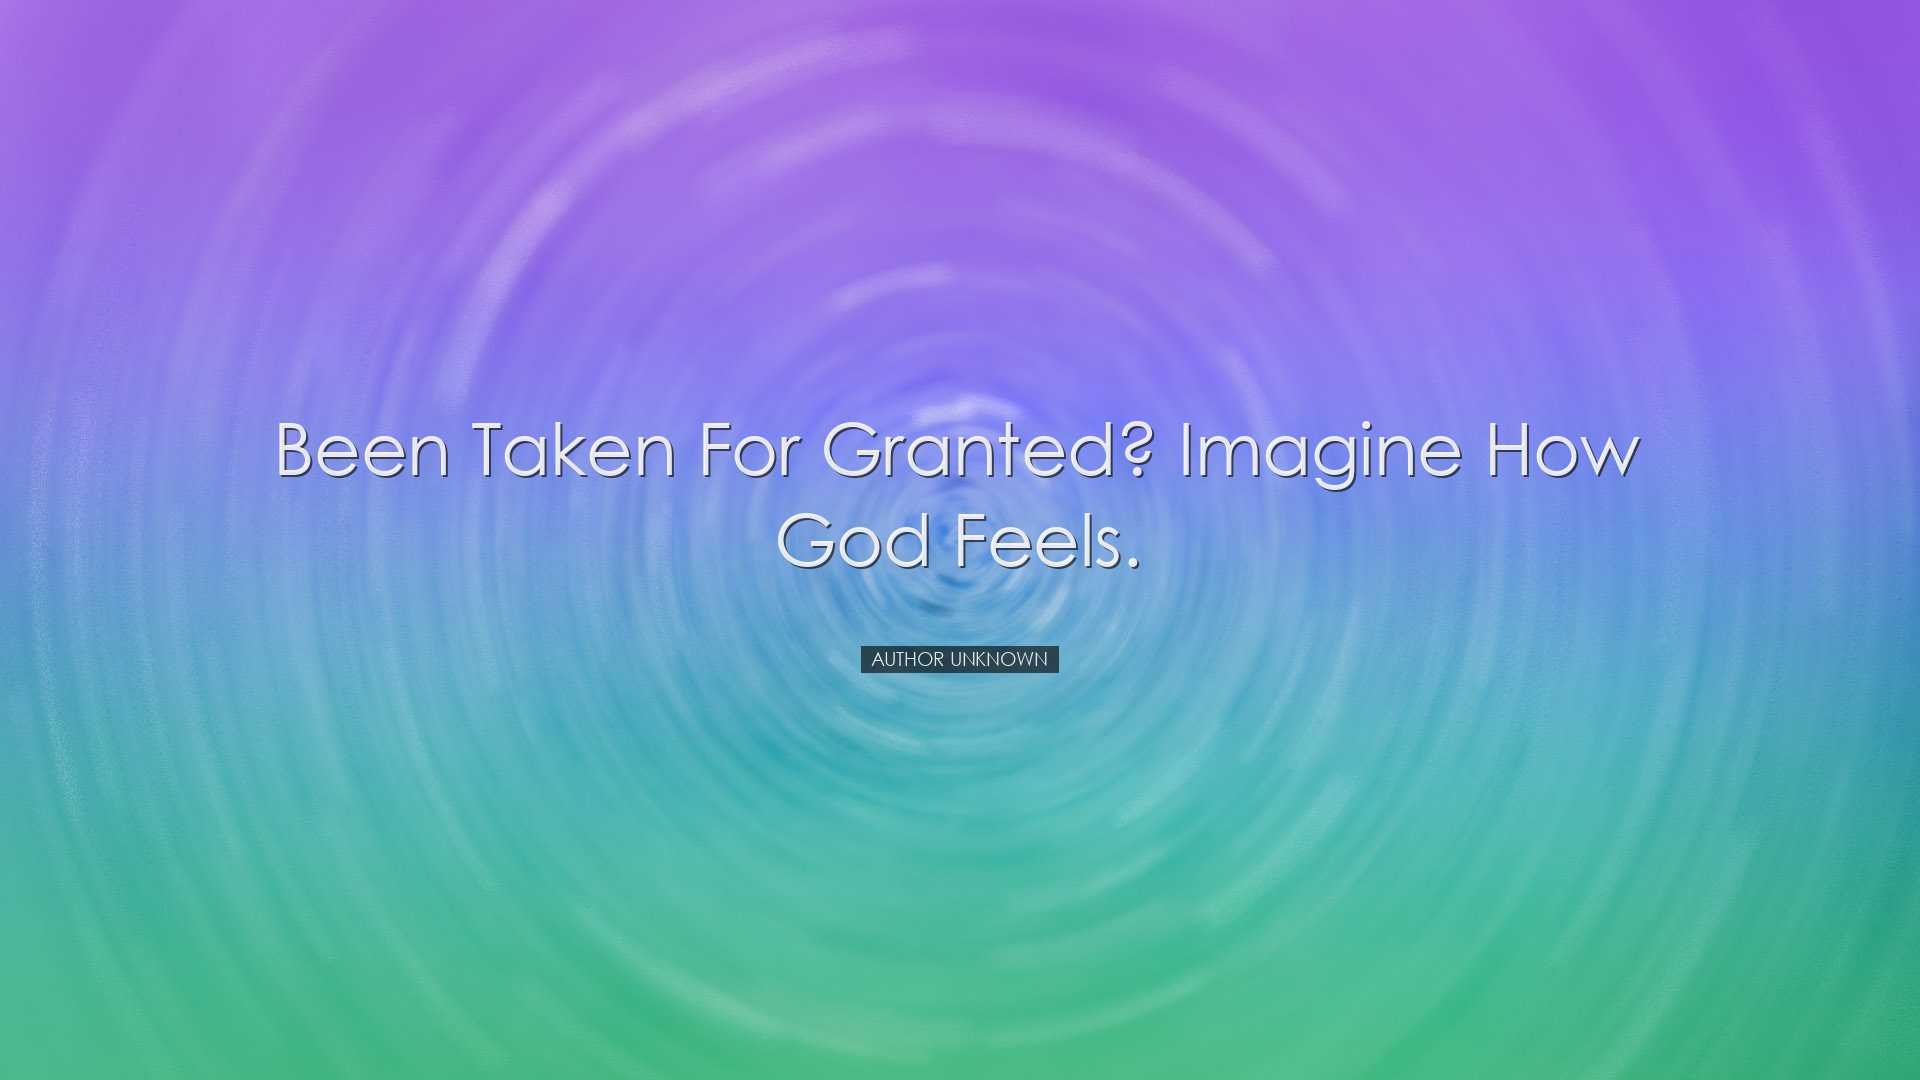 Been taken for granted? Imagine how God feels. - Author Unknown